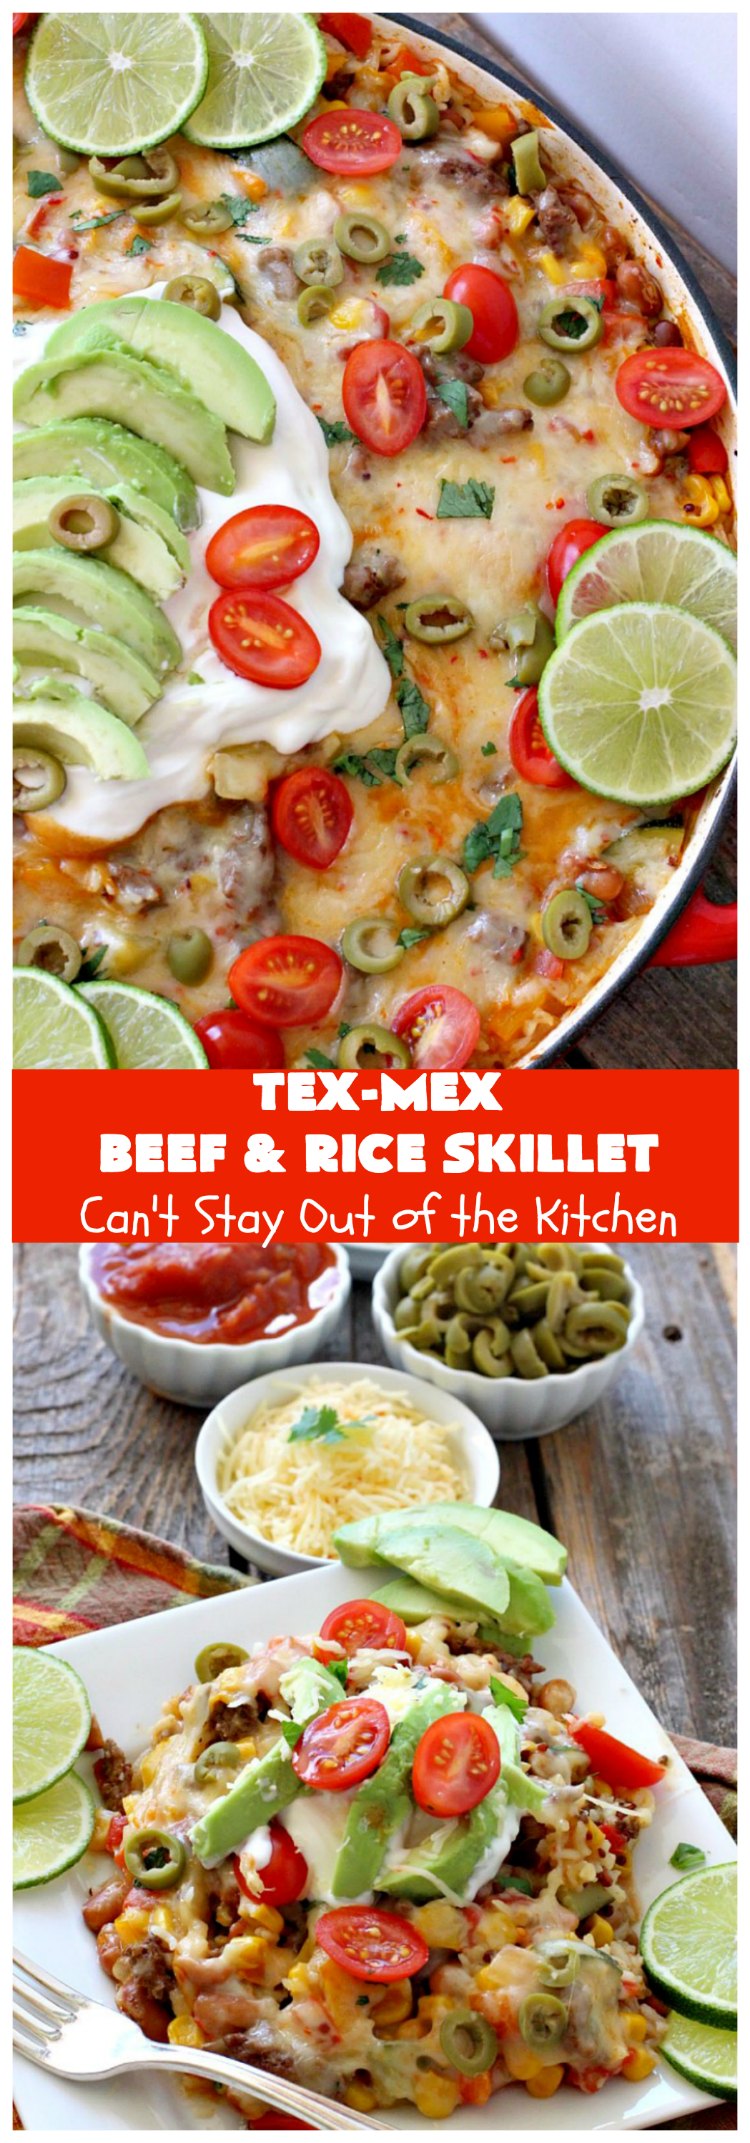 Tex-Mex Beef and Rice Skillet | Can't Stay Out of the Kitchen | this fantastic #TexMex meal takes only 30 minutes to prepare! It's loaded with toppings that add incredible flavor. Filled with healthy veggies, #beans & #rice. #GlutenFree #TexMexBeansAndRiceSkillet